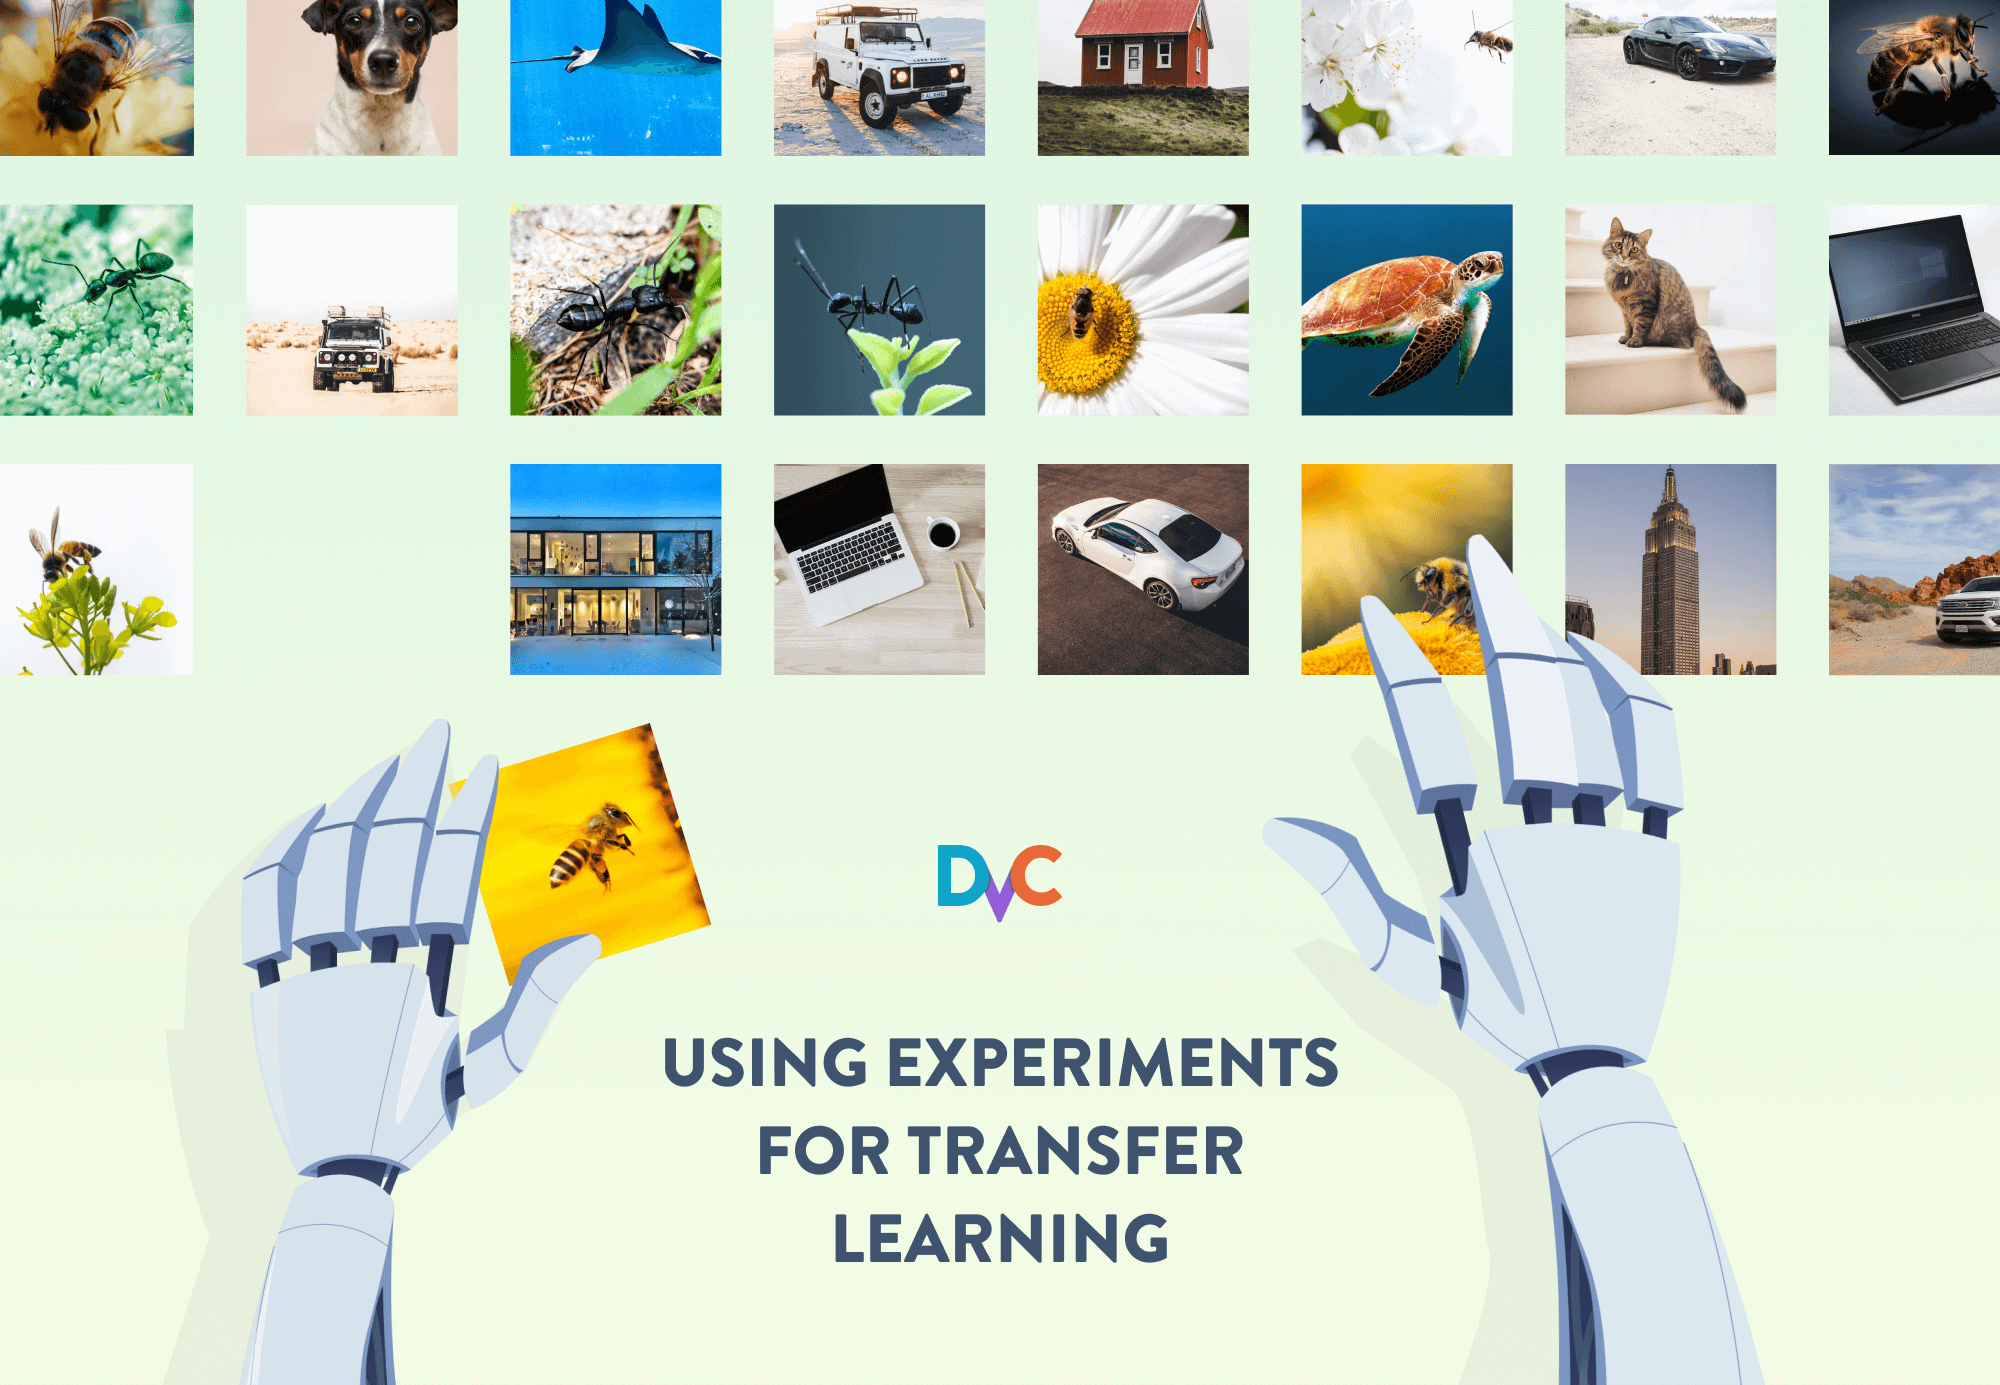 DVC Office Hours - Using Experiments For Transfer Learning